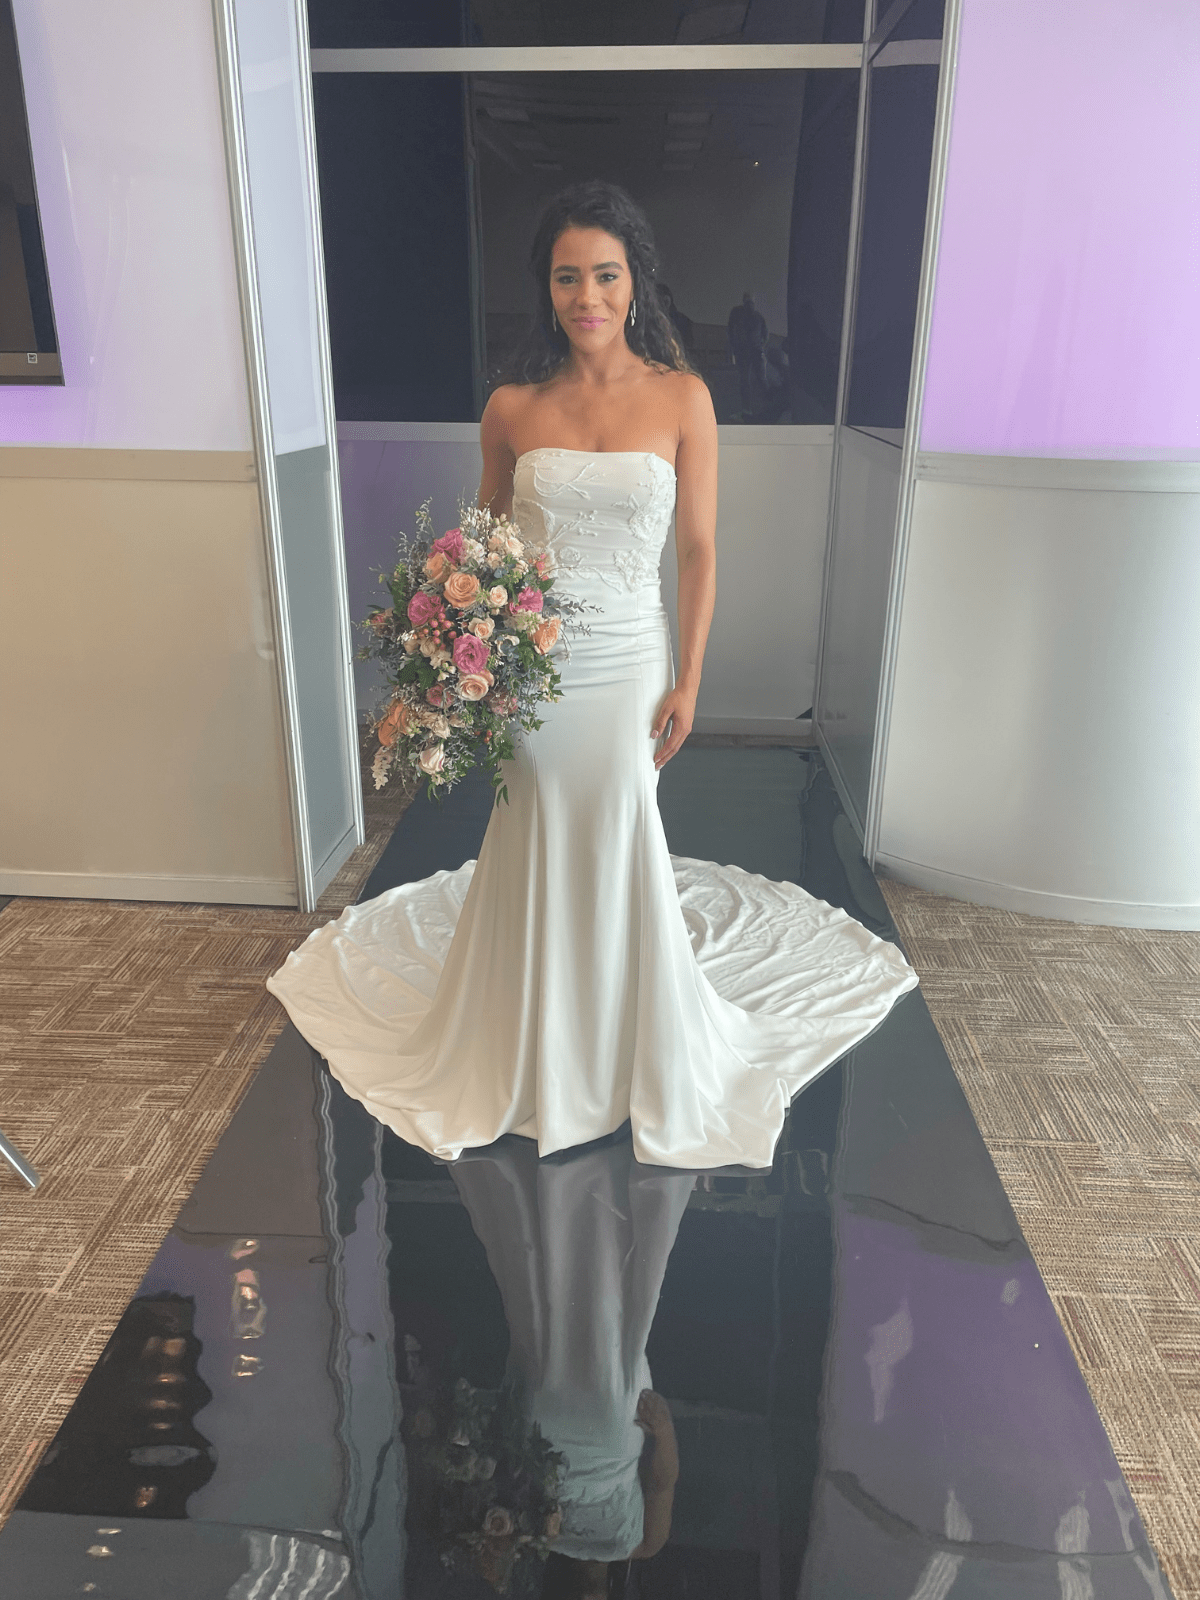 Wedding Gown in Maple Grove MN